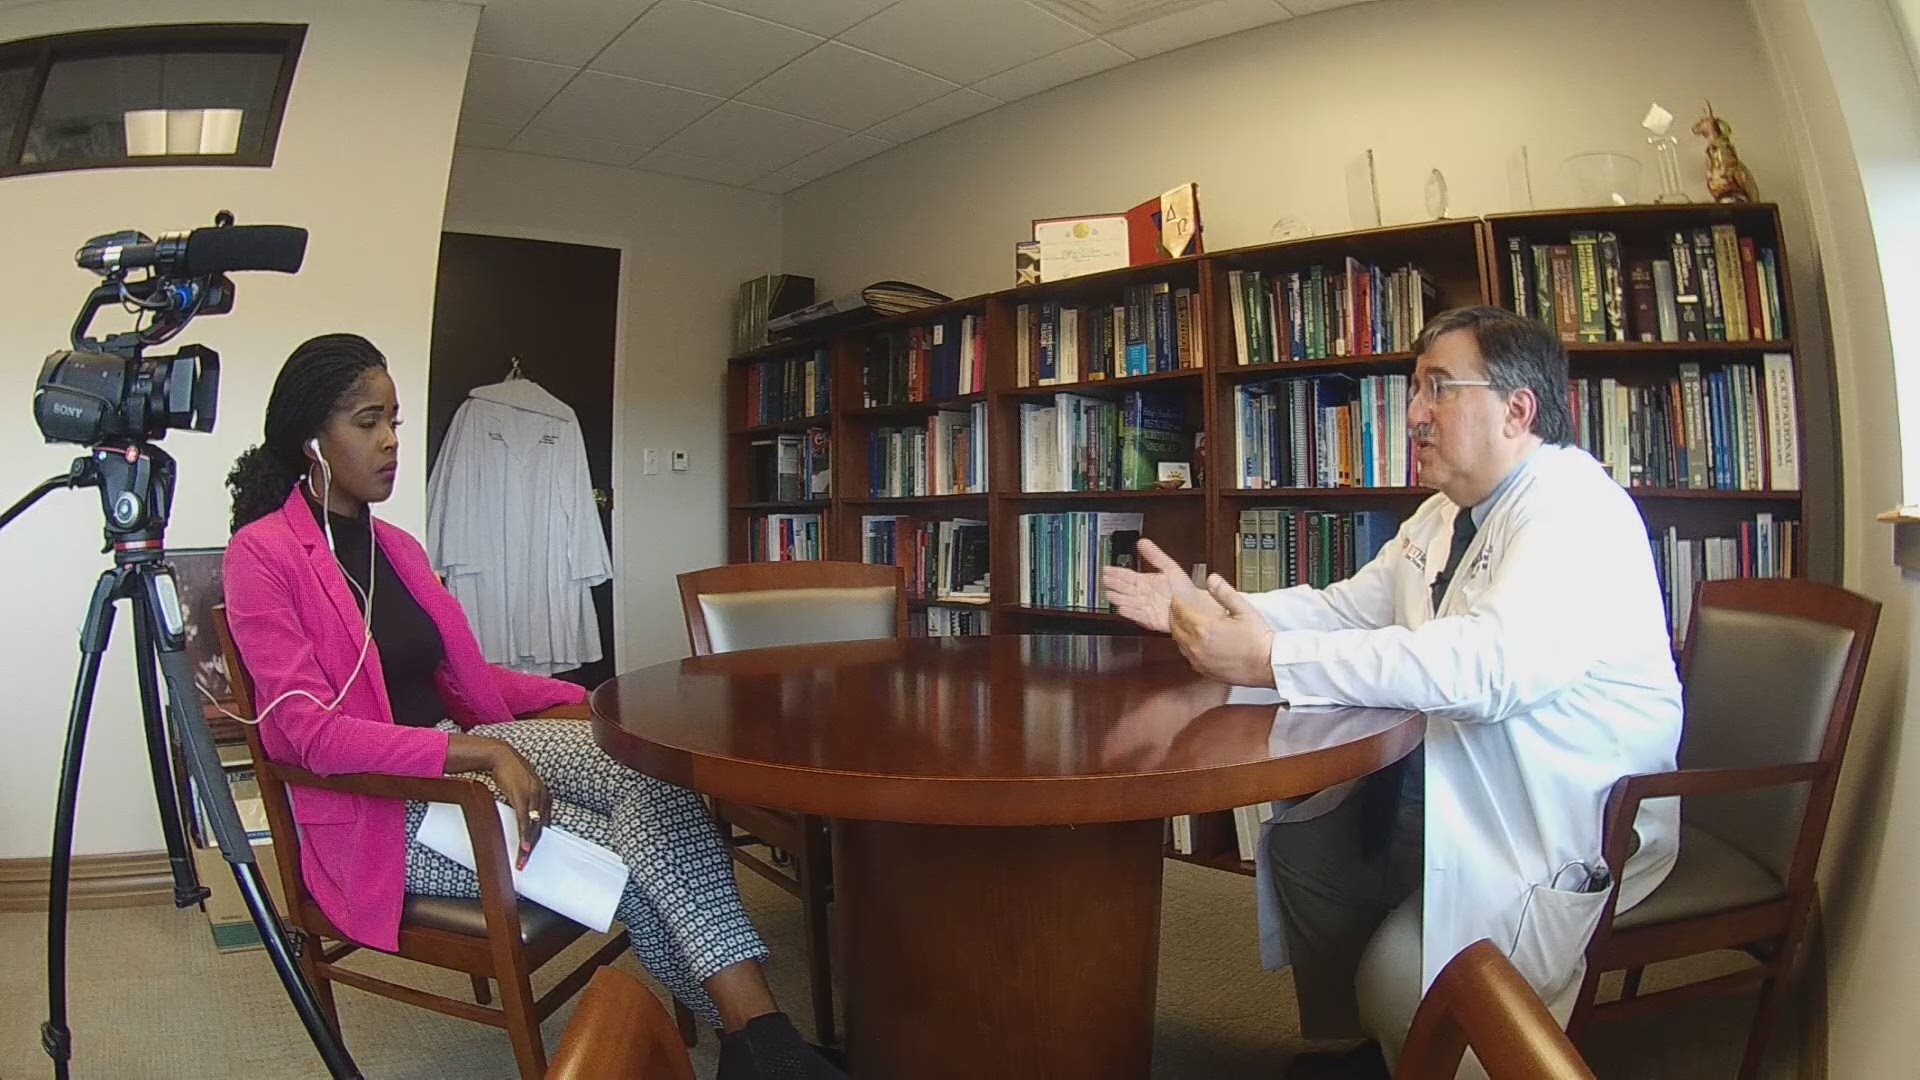 Tashara Parker speaks to a doctor that explains the risks involved in consuming unclean water.